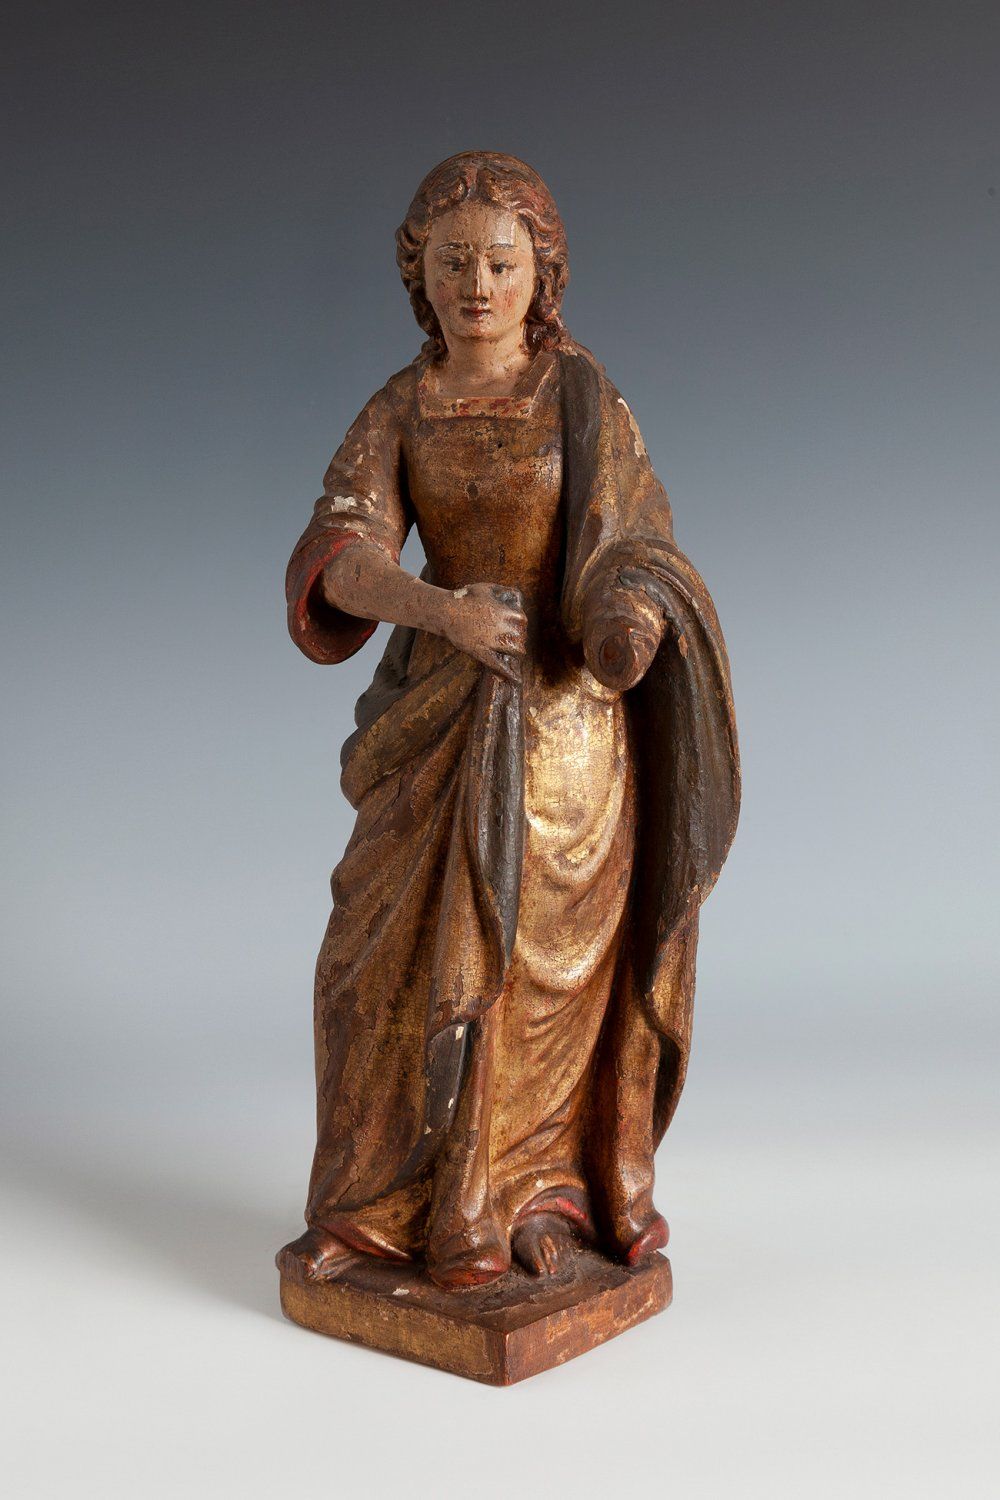 Null Spanish school; 17th-18th centuries.
"Virgin Mary".
Carved and polychromed &hellip;